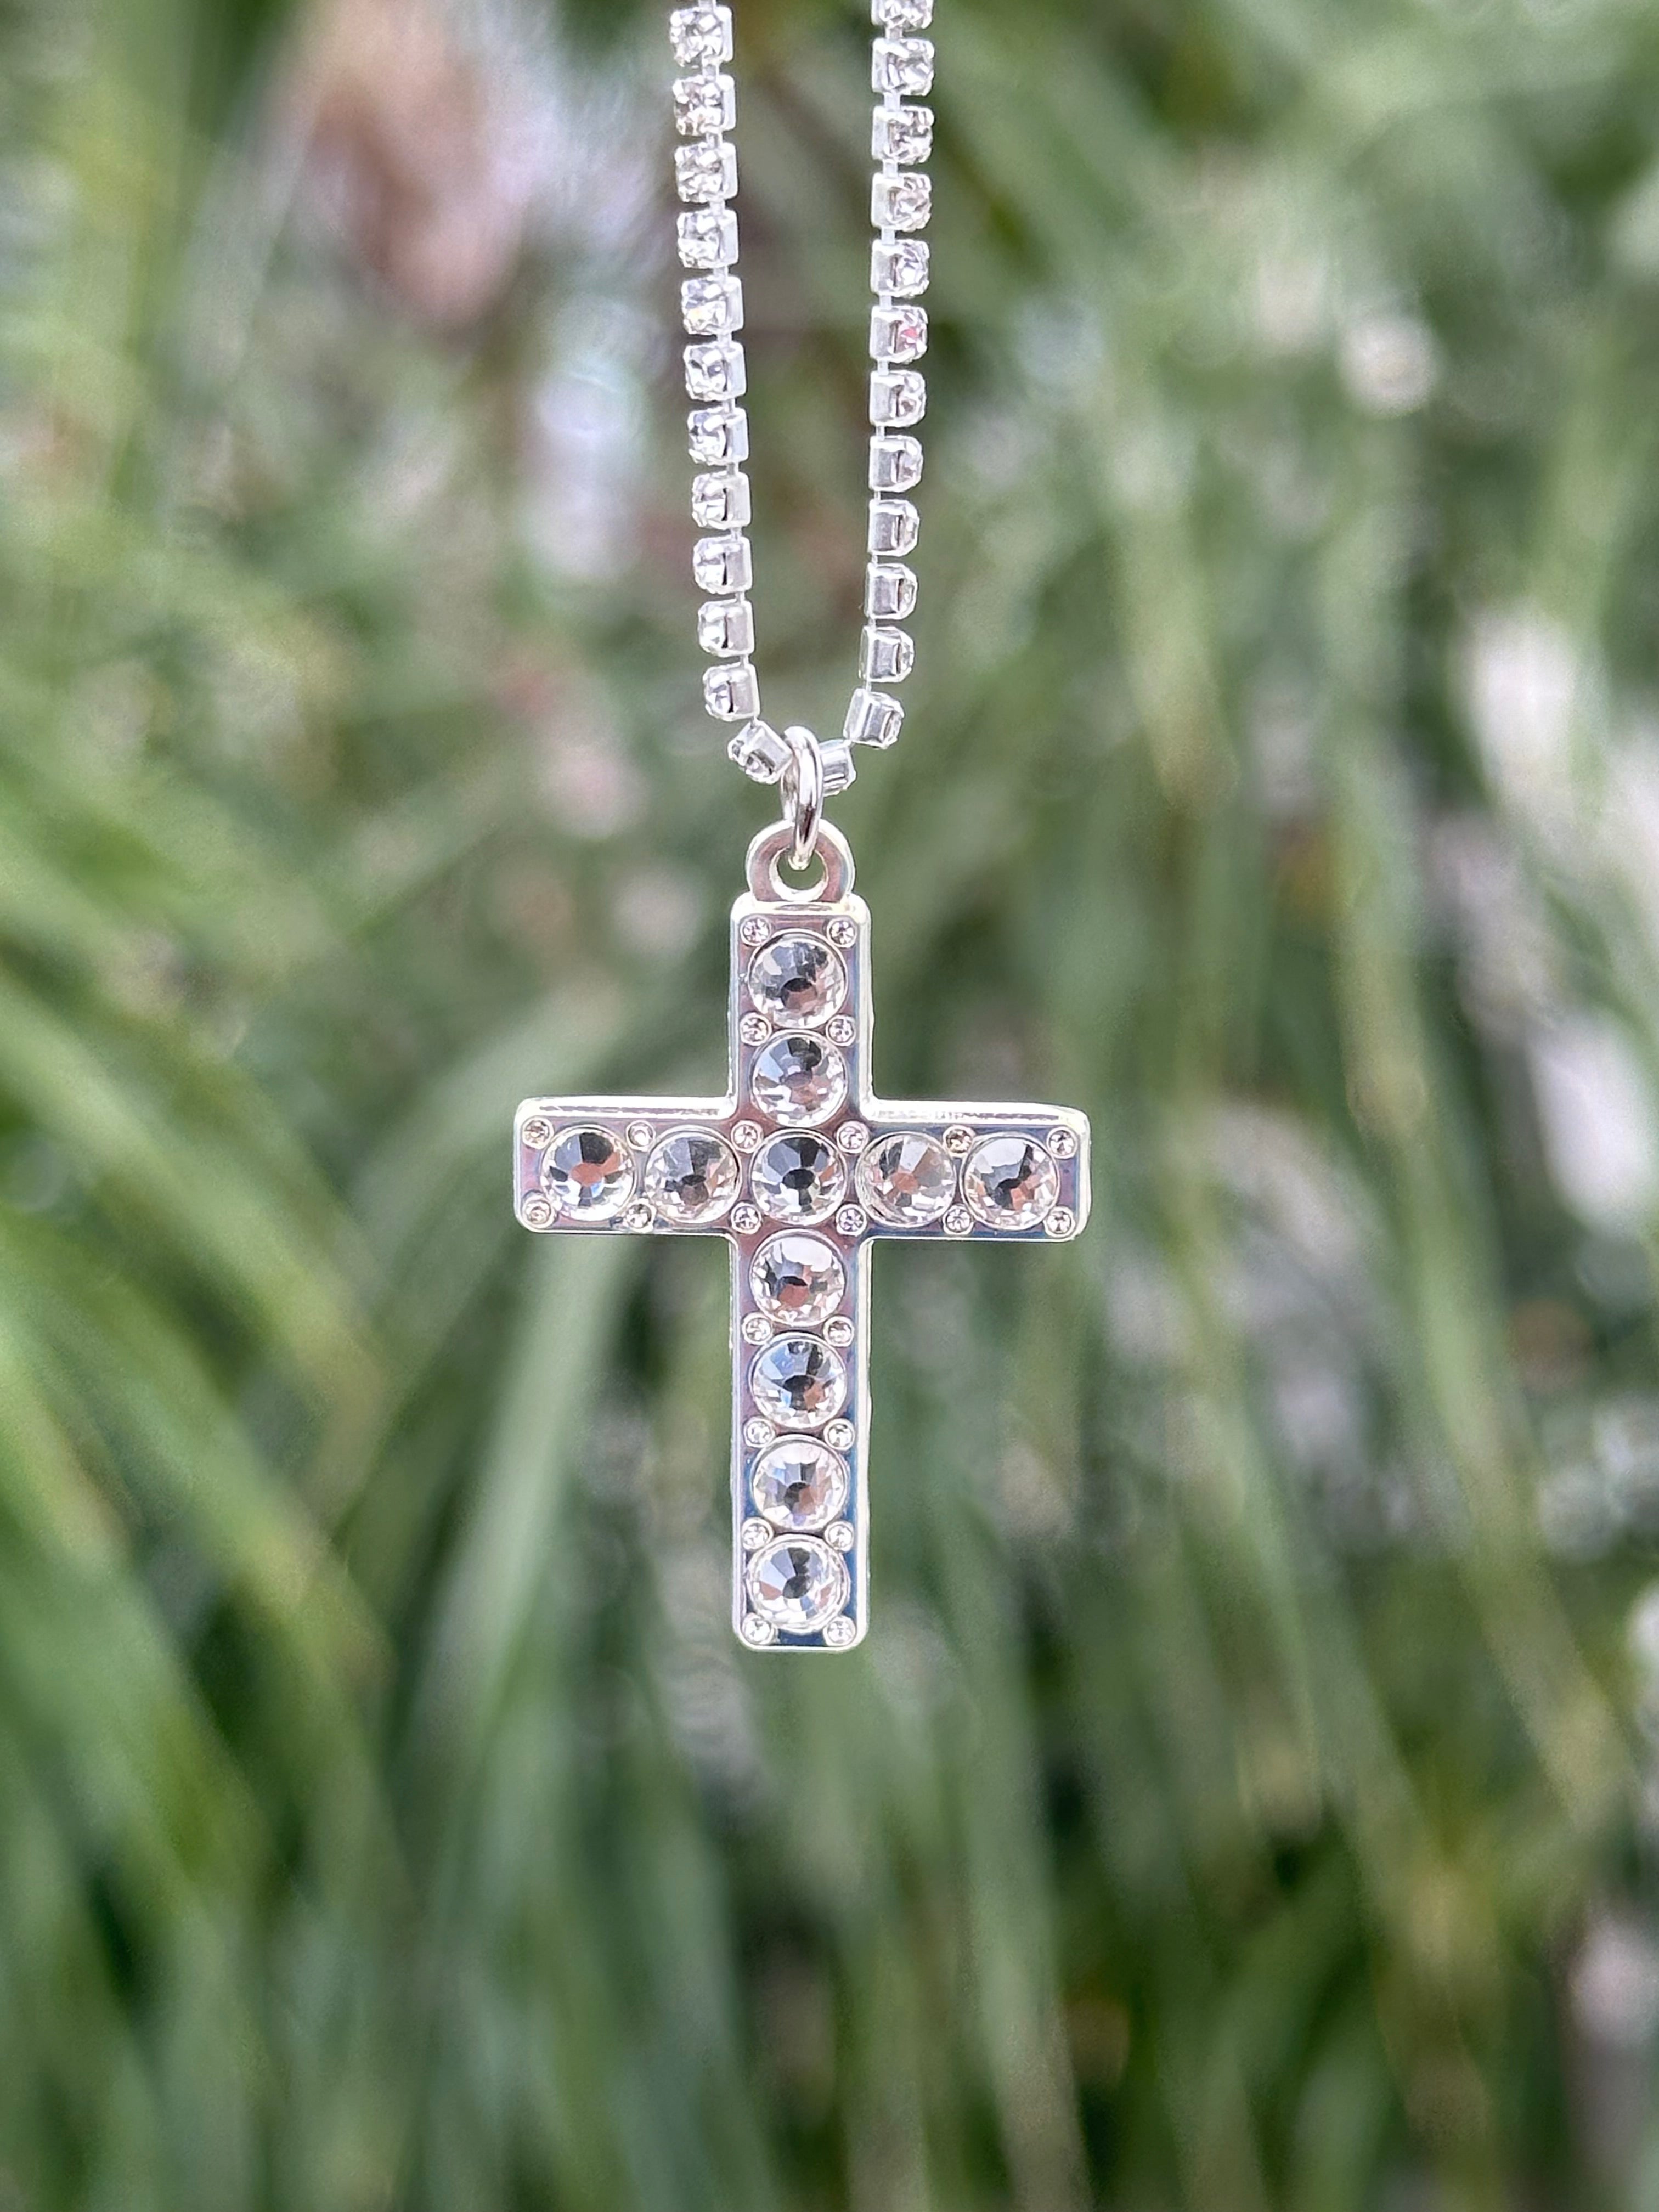 *NEW SILVER "JESUS CROSS" ICED OUT CHAIN VERY LIMITED